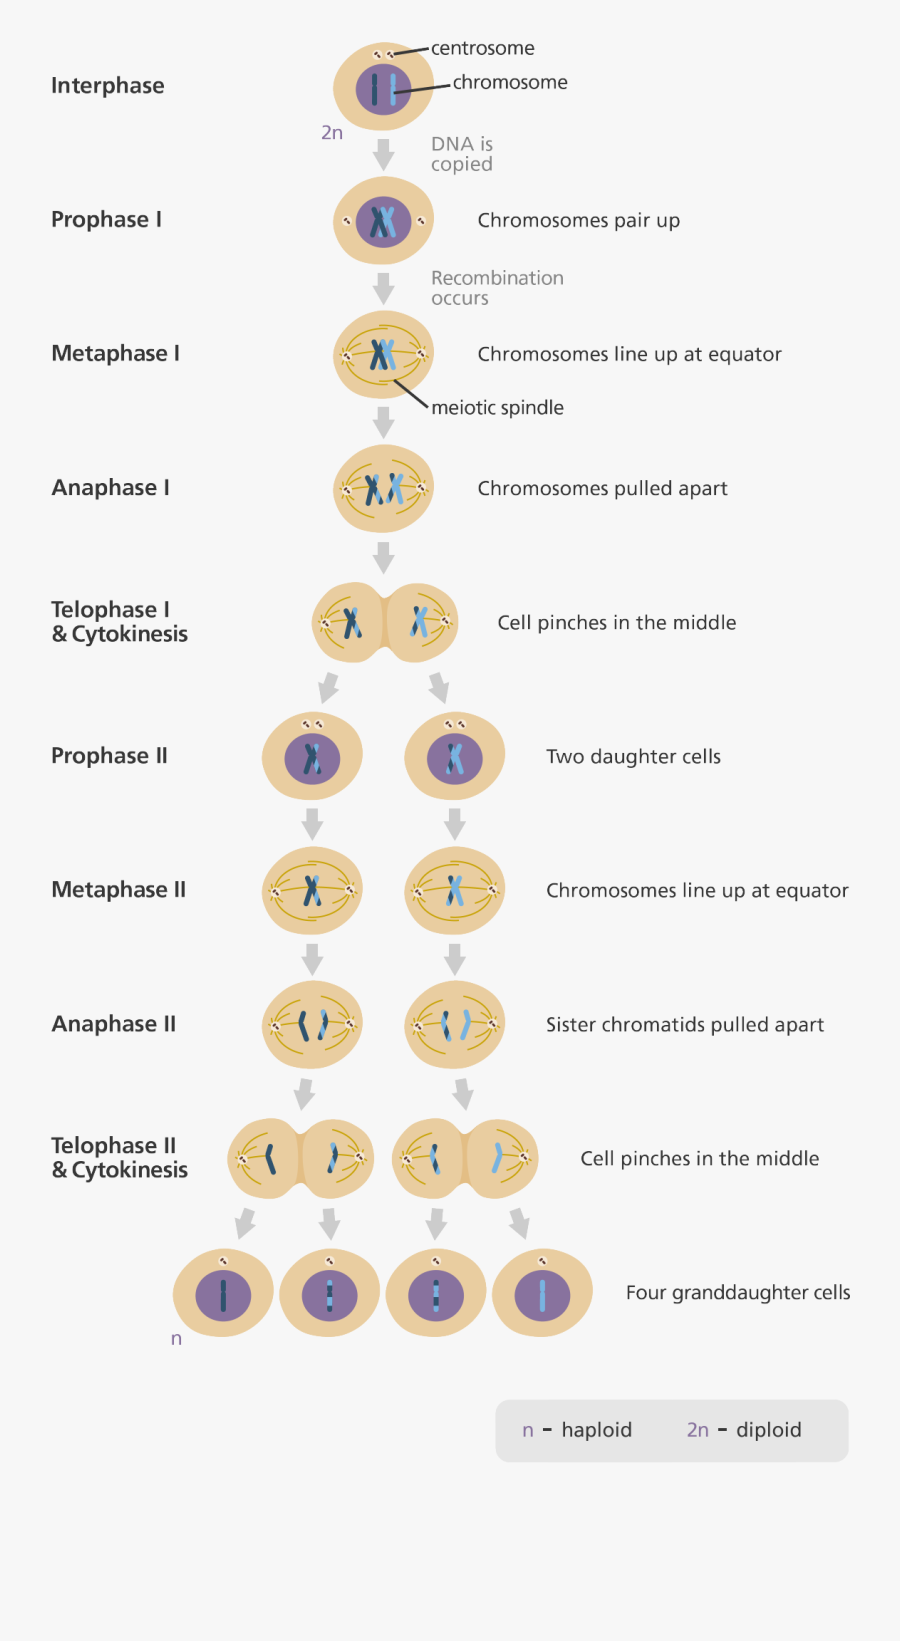 Image Result For Stages Of Meiosis - Meiosis Chain Starting With Prophase 1, Transparent Clipart